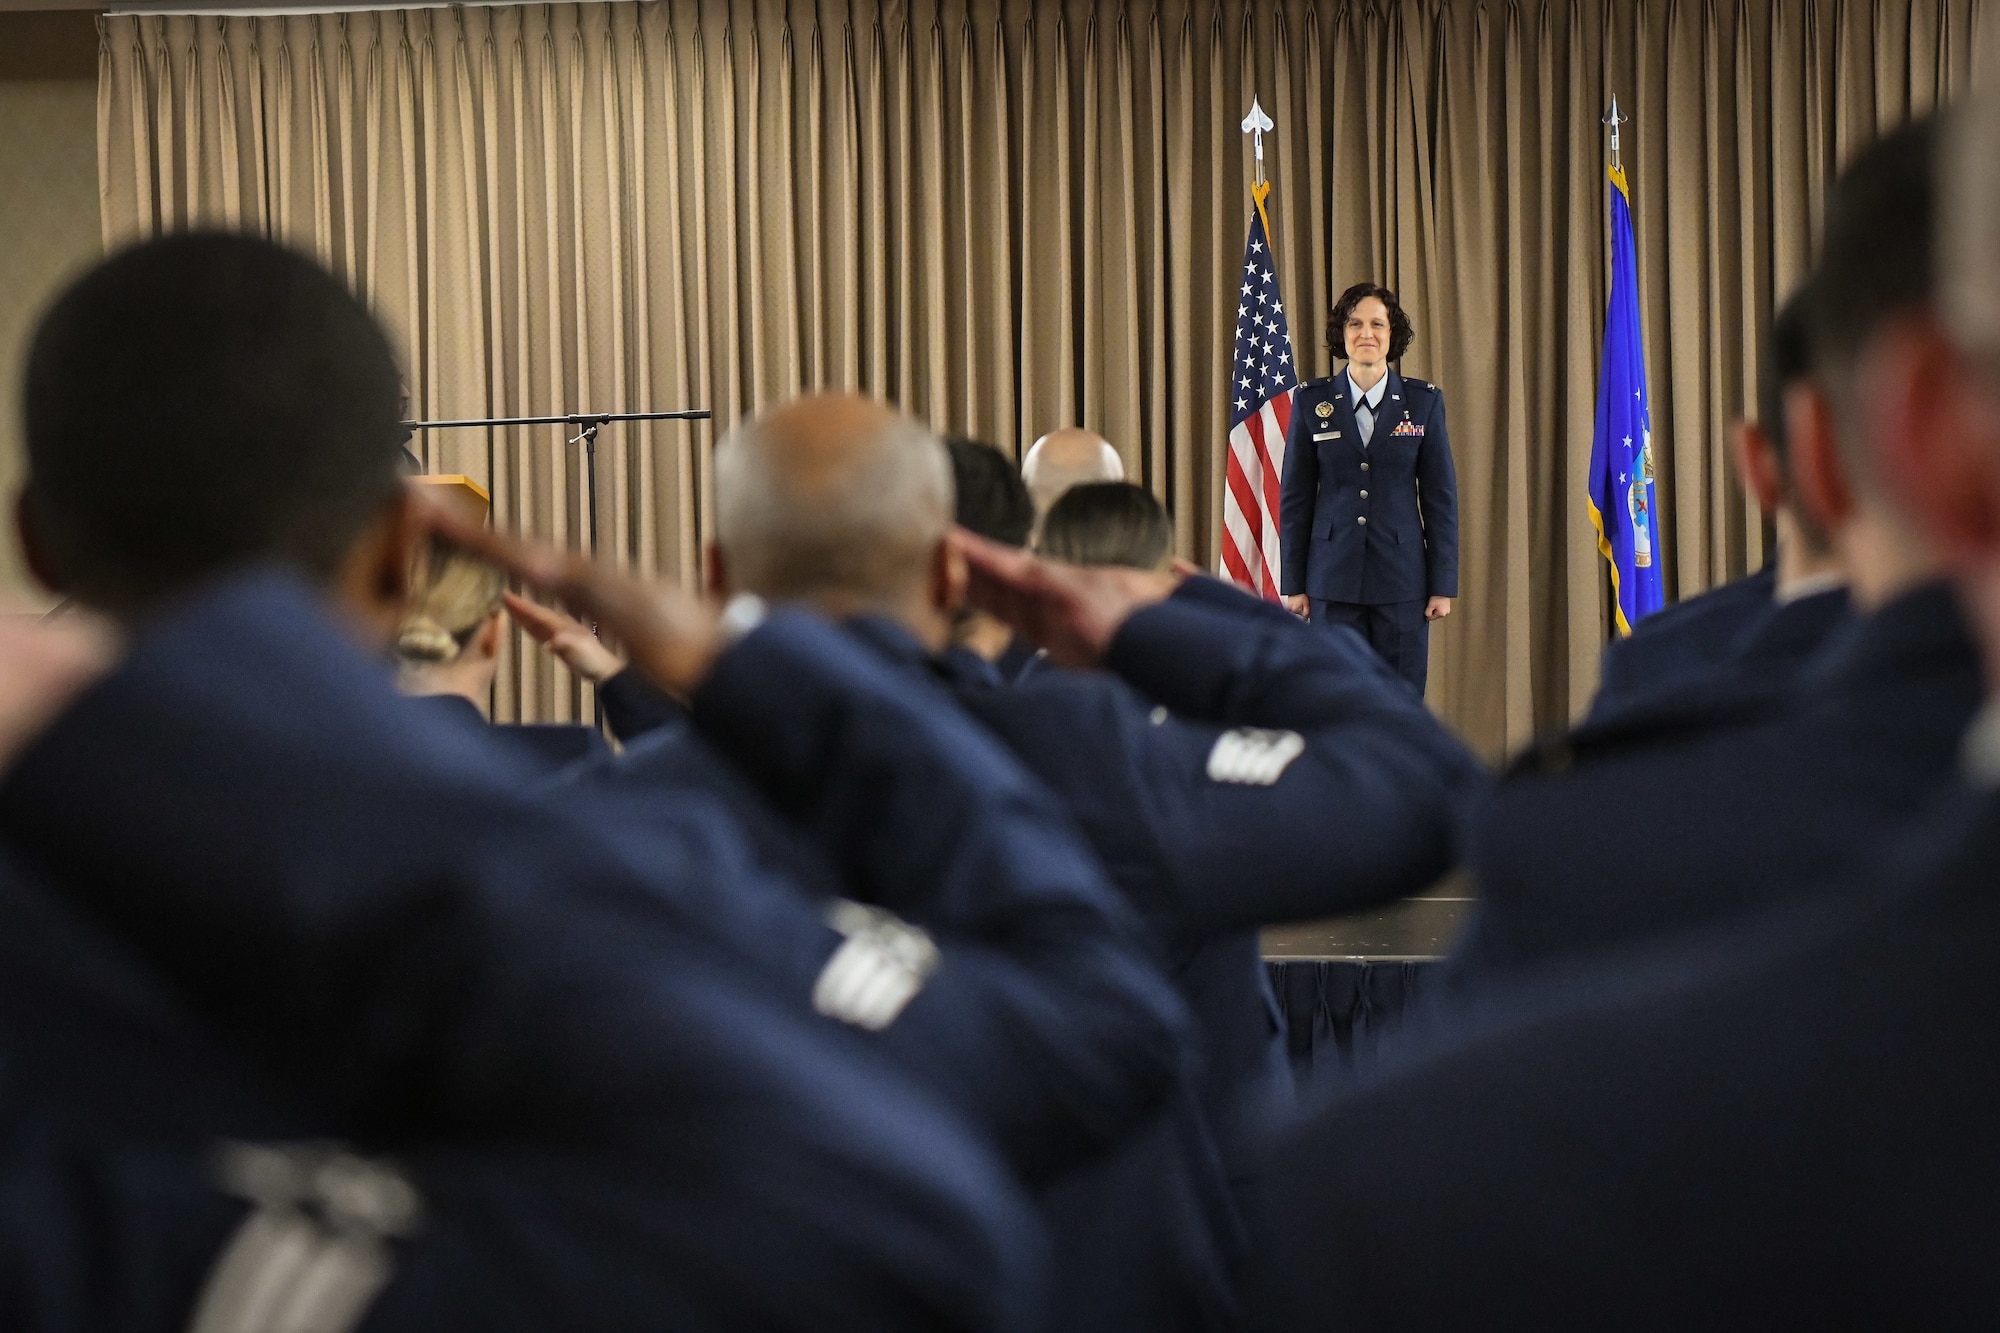 People in blue uniforms salute a woman standing on a stage during a ceremony.